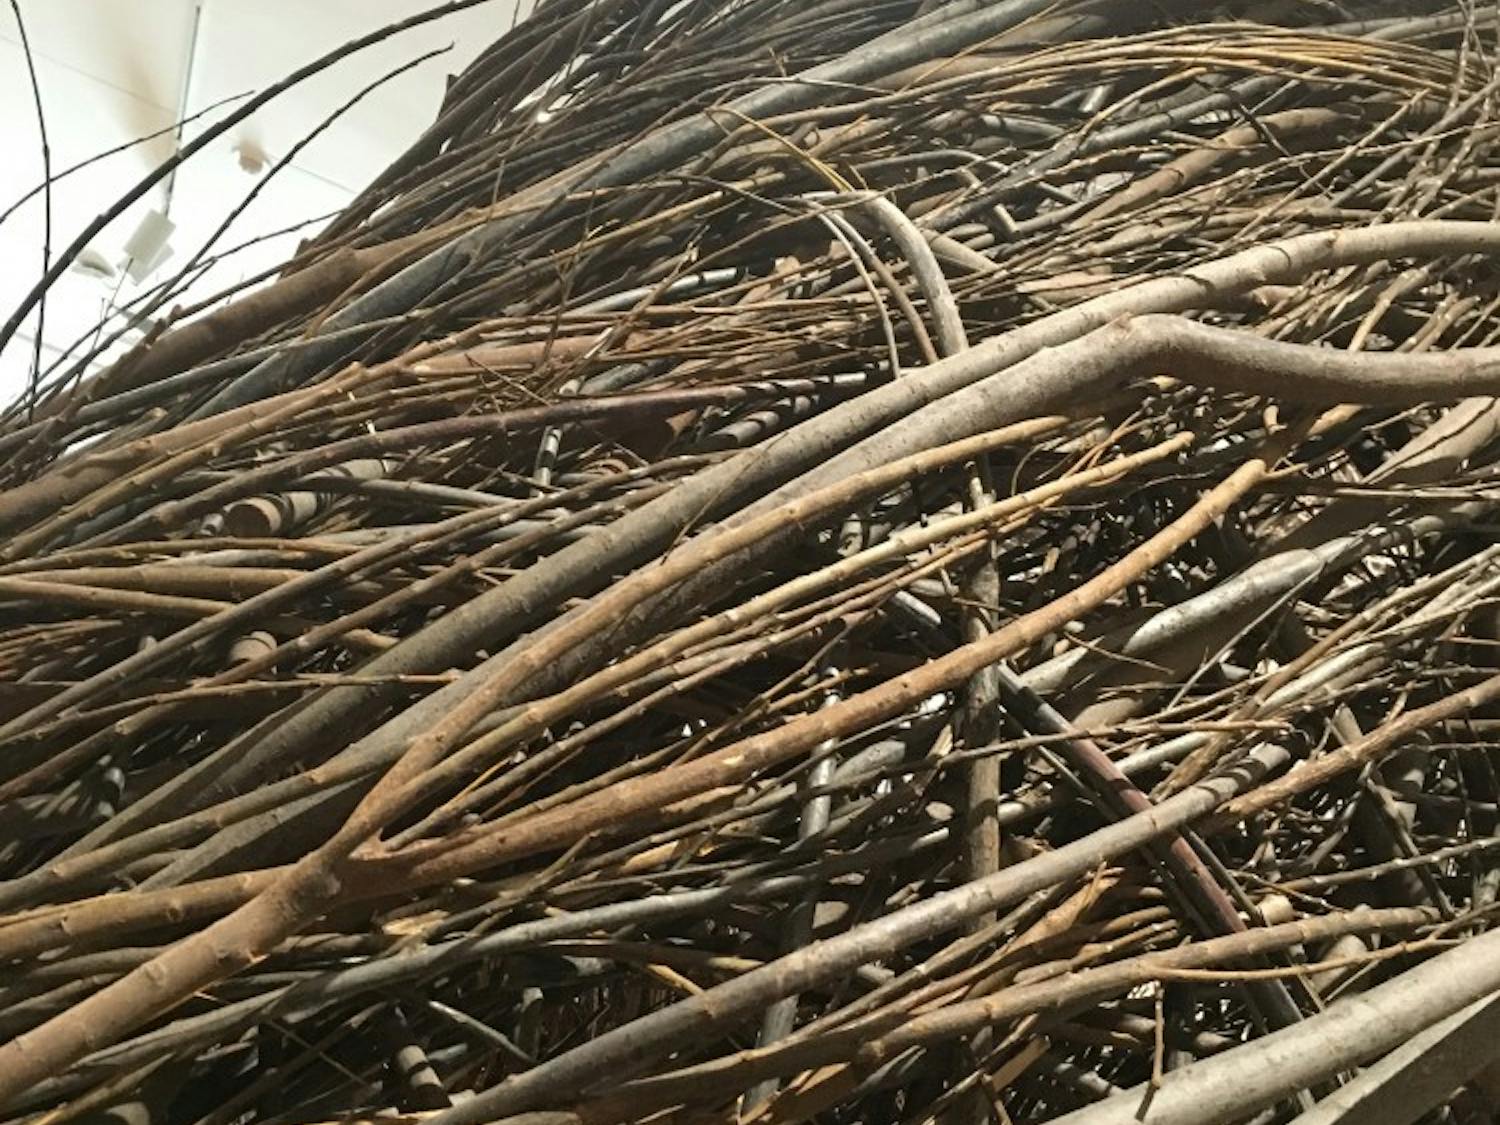 Patrick Dougherty will begin working on a sculpture made of sticks outside the Ackland.